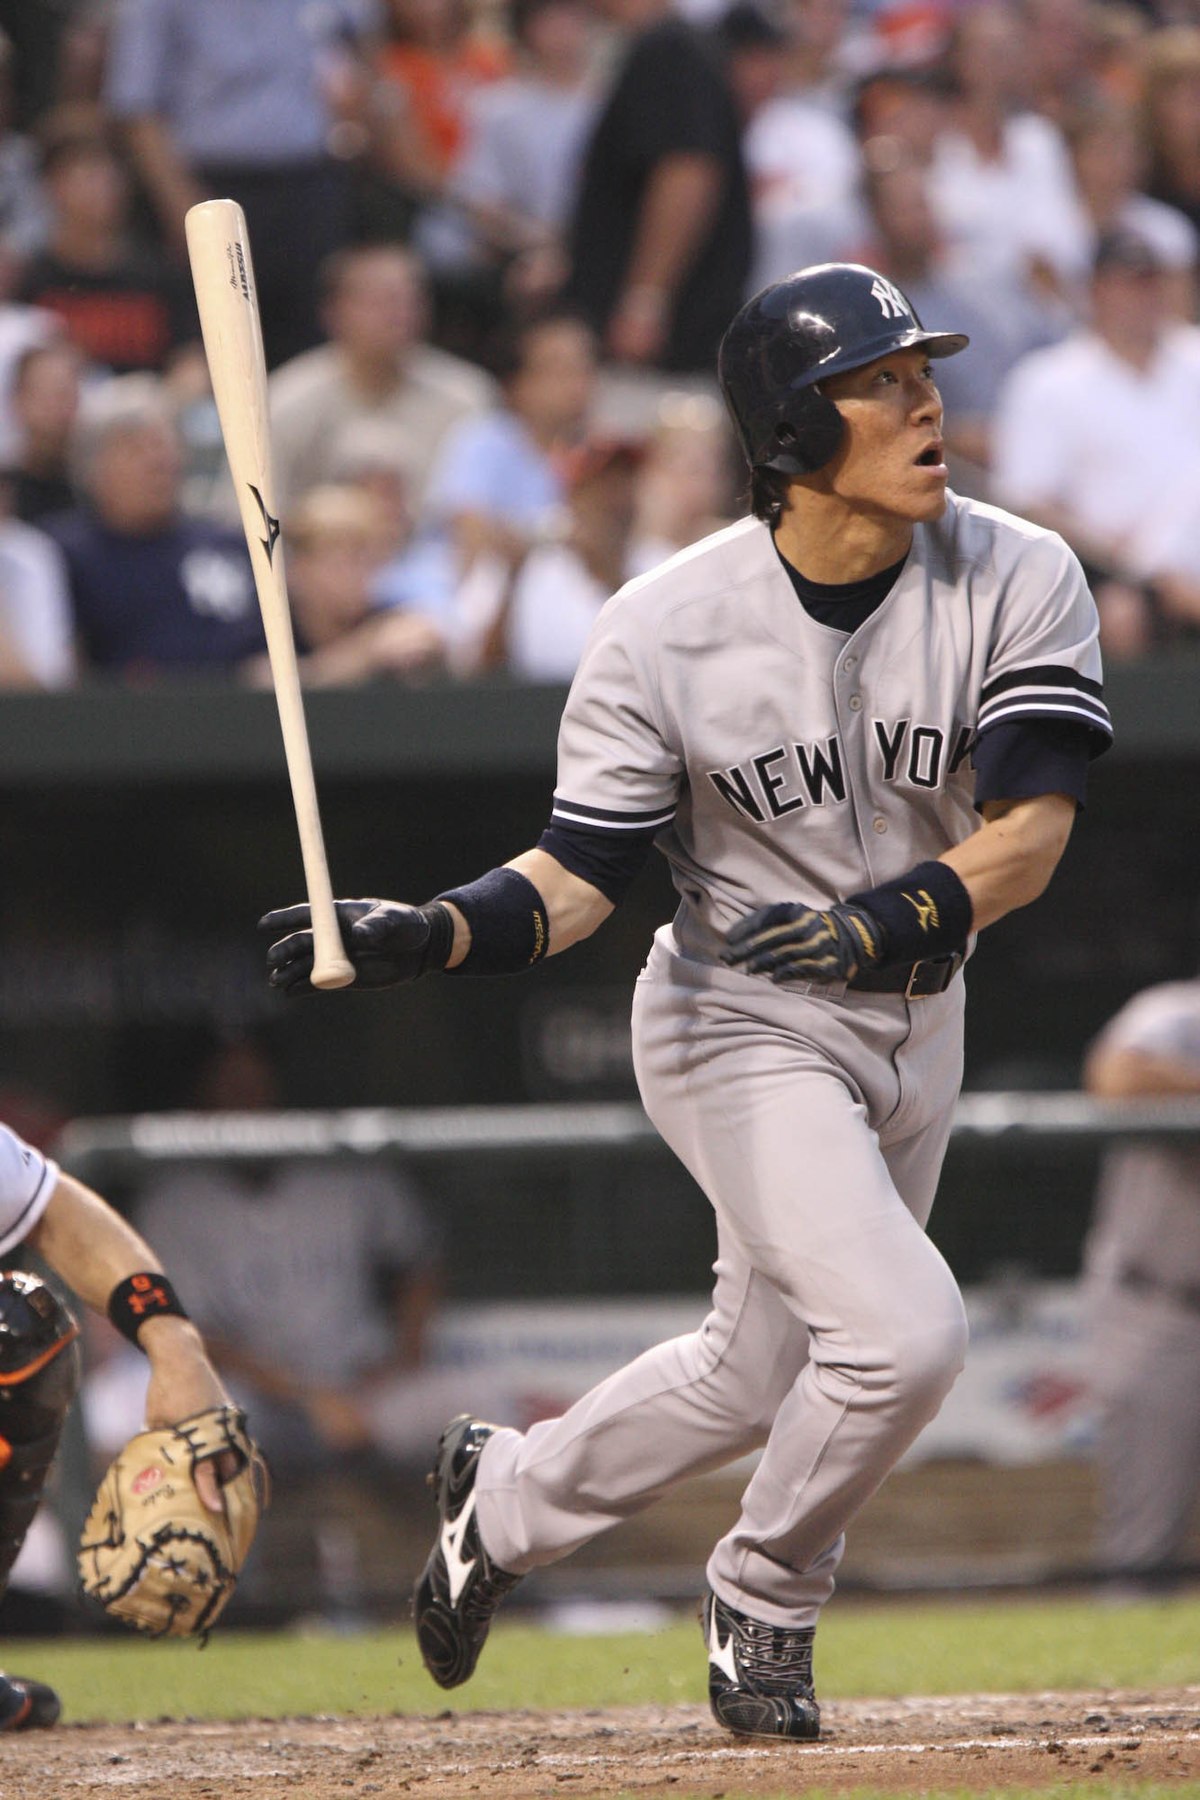 Yankees Videos on X: On this day in 2009, Hideki Matsui launched